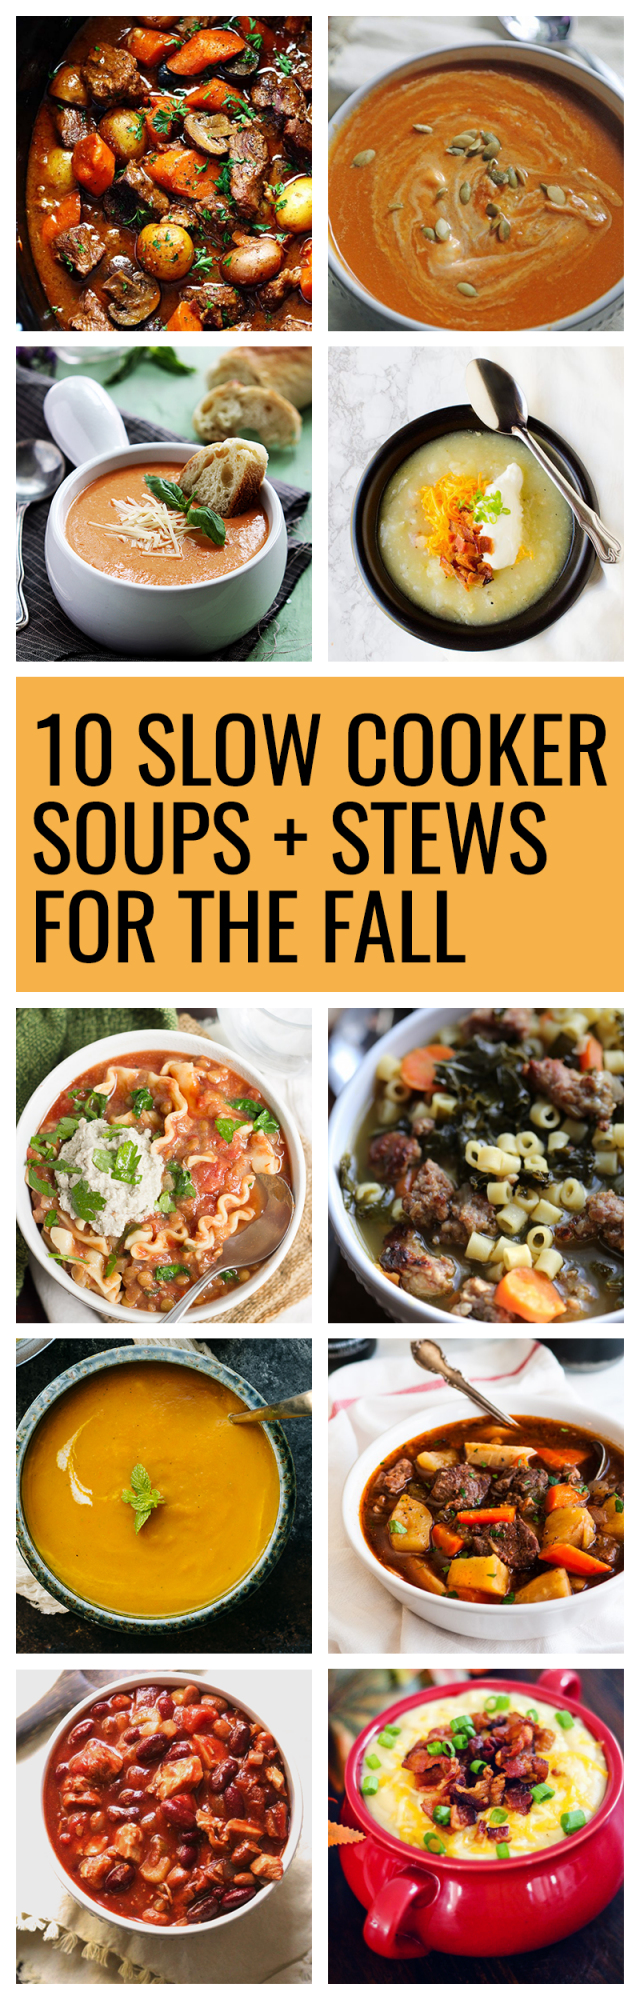 10 Fall Crockpot Slow Cooker Soup and Stew Recipes